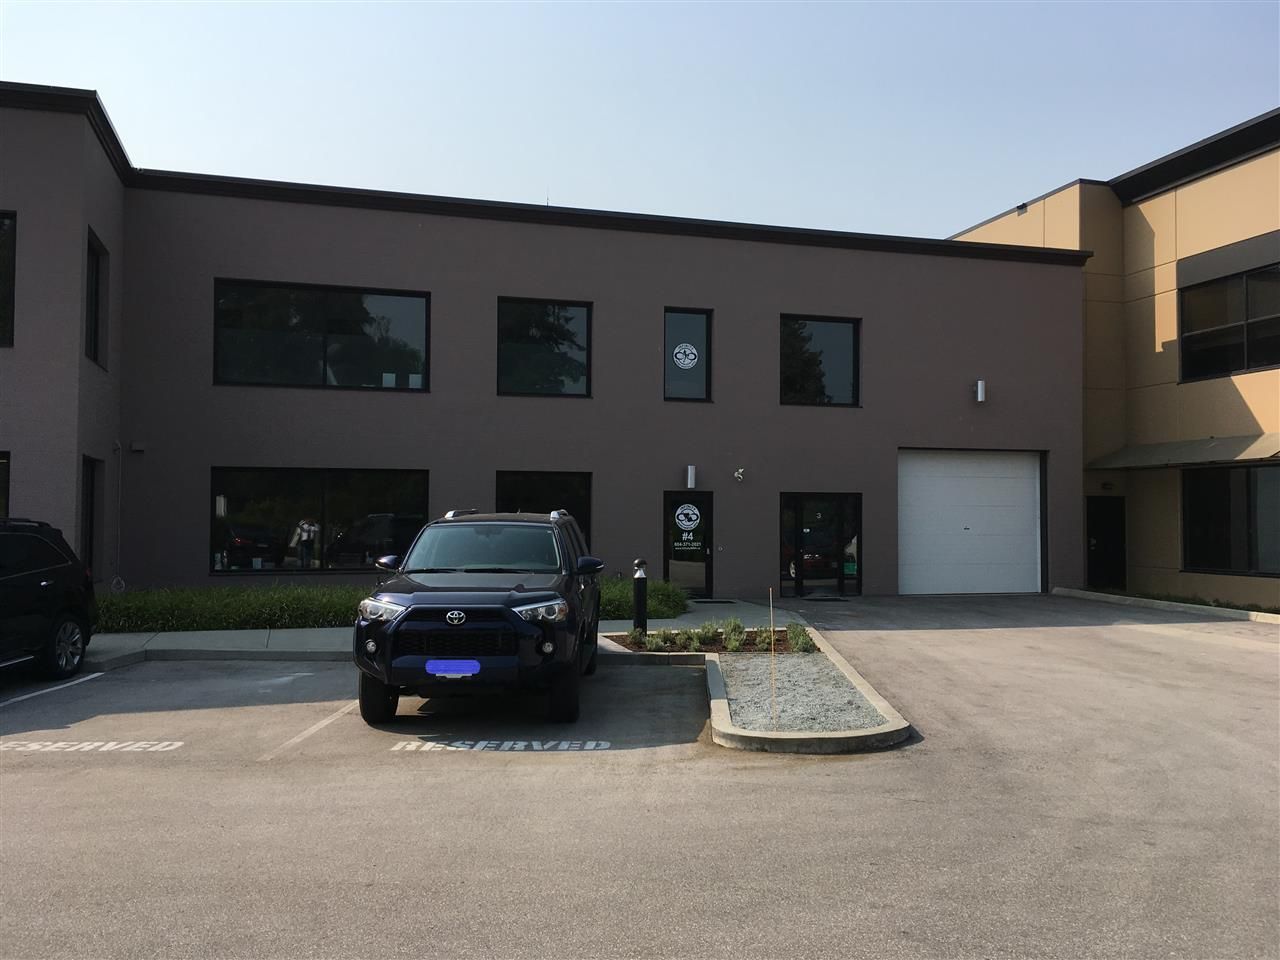 Main Photo: 3 20252 98 AVENUE in Langley: Walnut Grove Industrial for lease : MLS®# C8020770